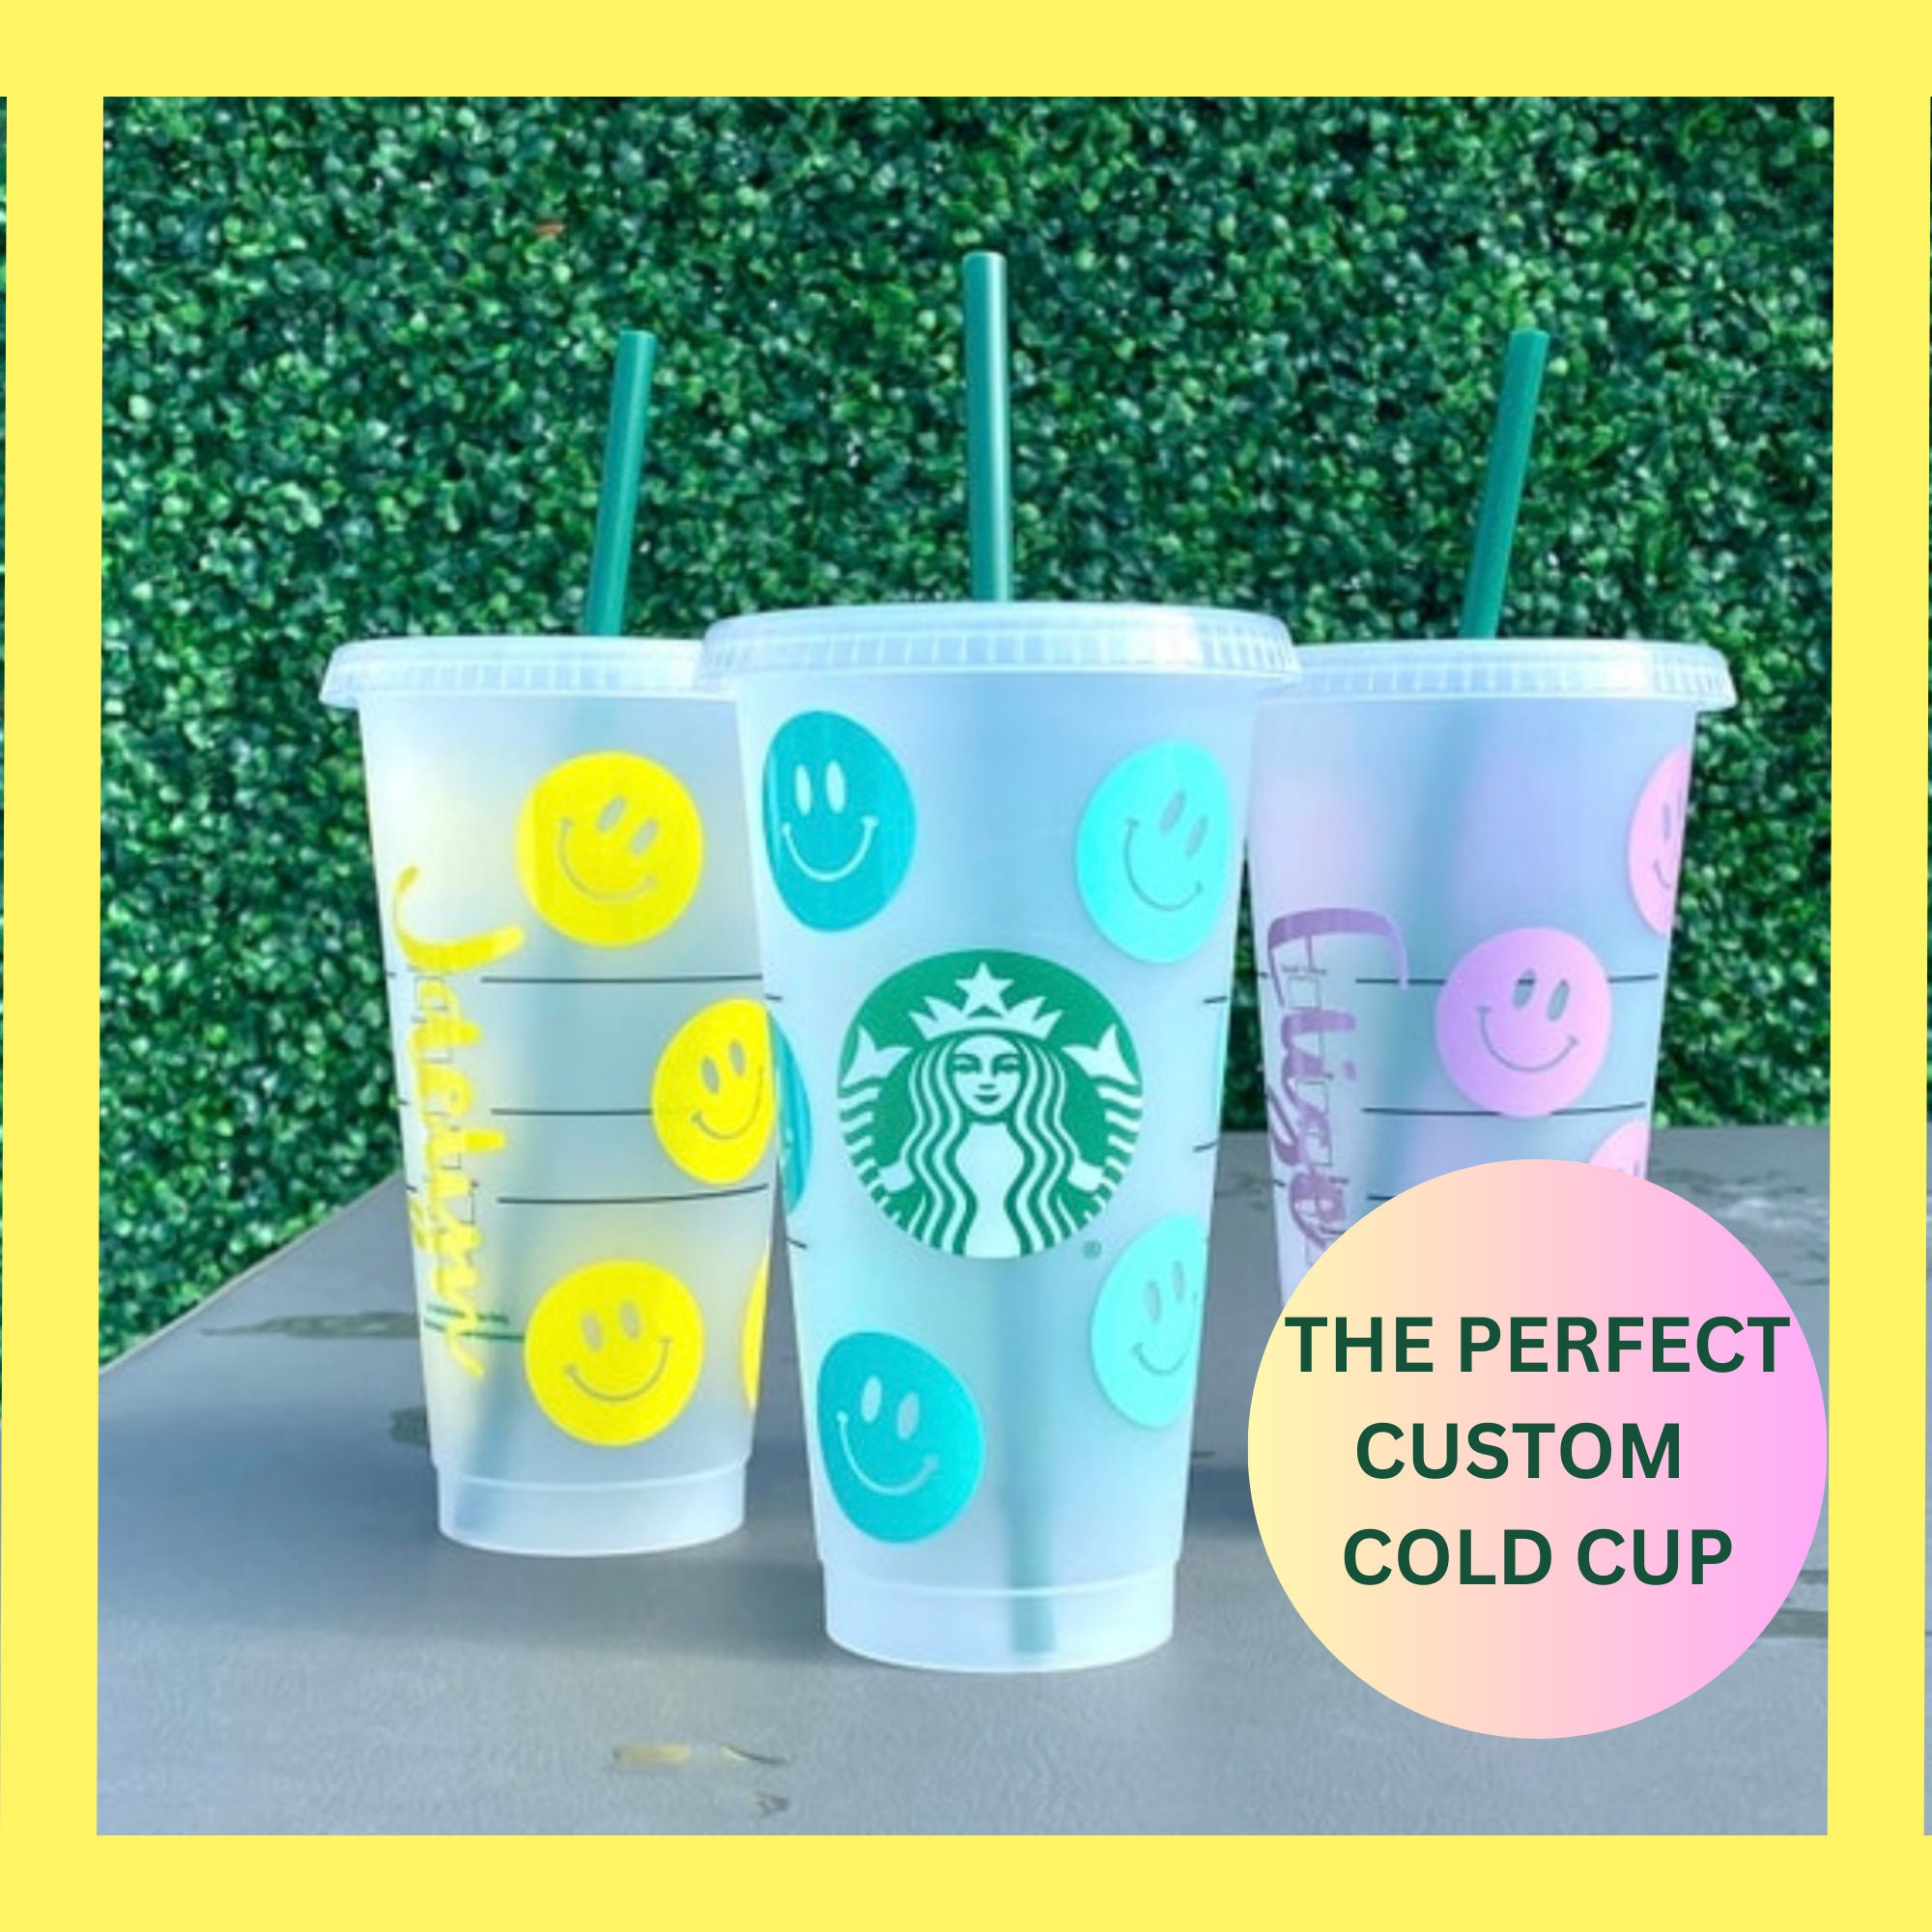 Plastic Emoji Mugs Drinkware – Emoticons Coffee Cups, Heart Eyes, Sunglasses Perfect for Birthday, Party Favors and Gifts 9 oz (4 Pack)